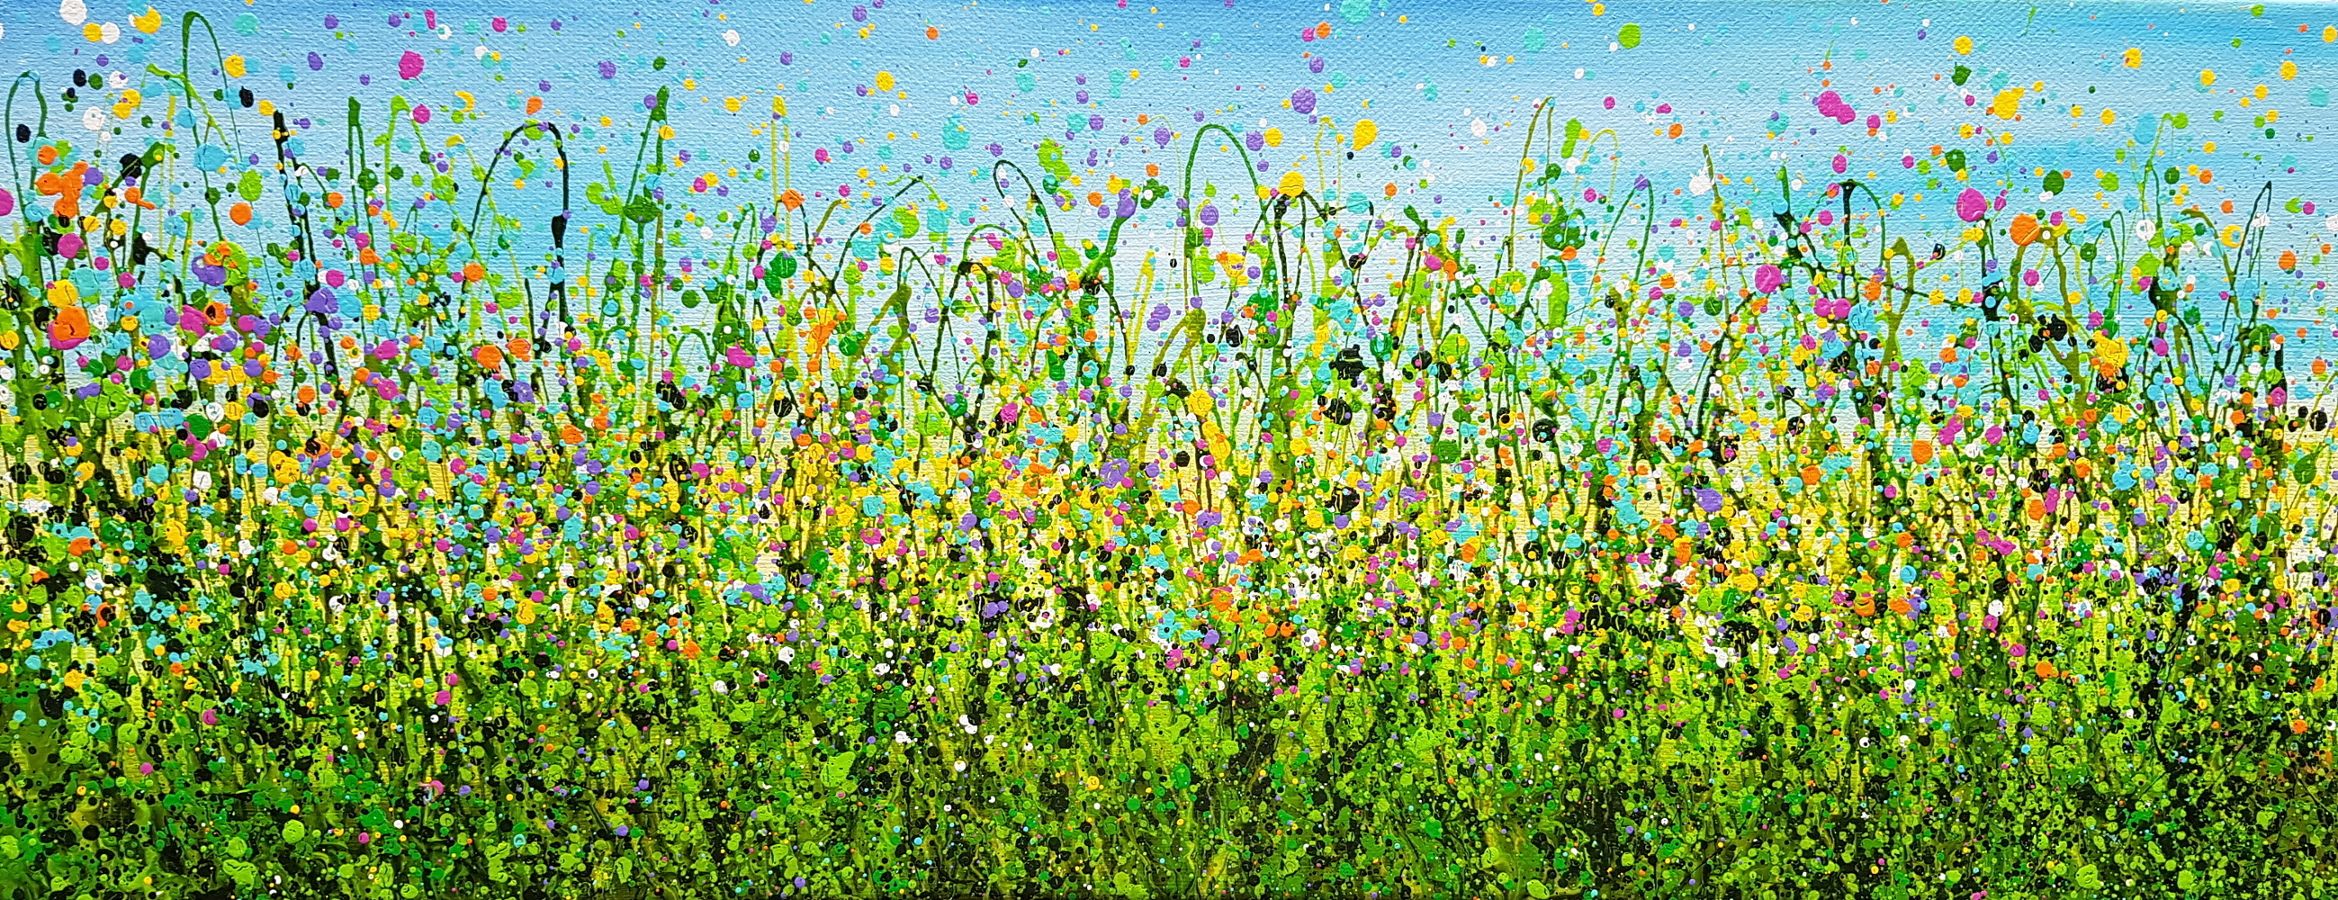 Summer Spray Meadows #3 by Lucy Moore